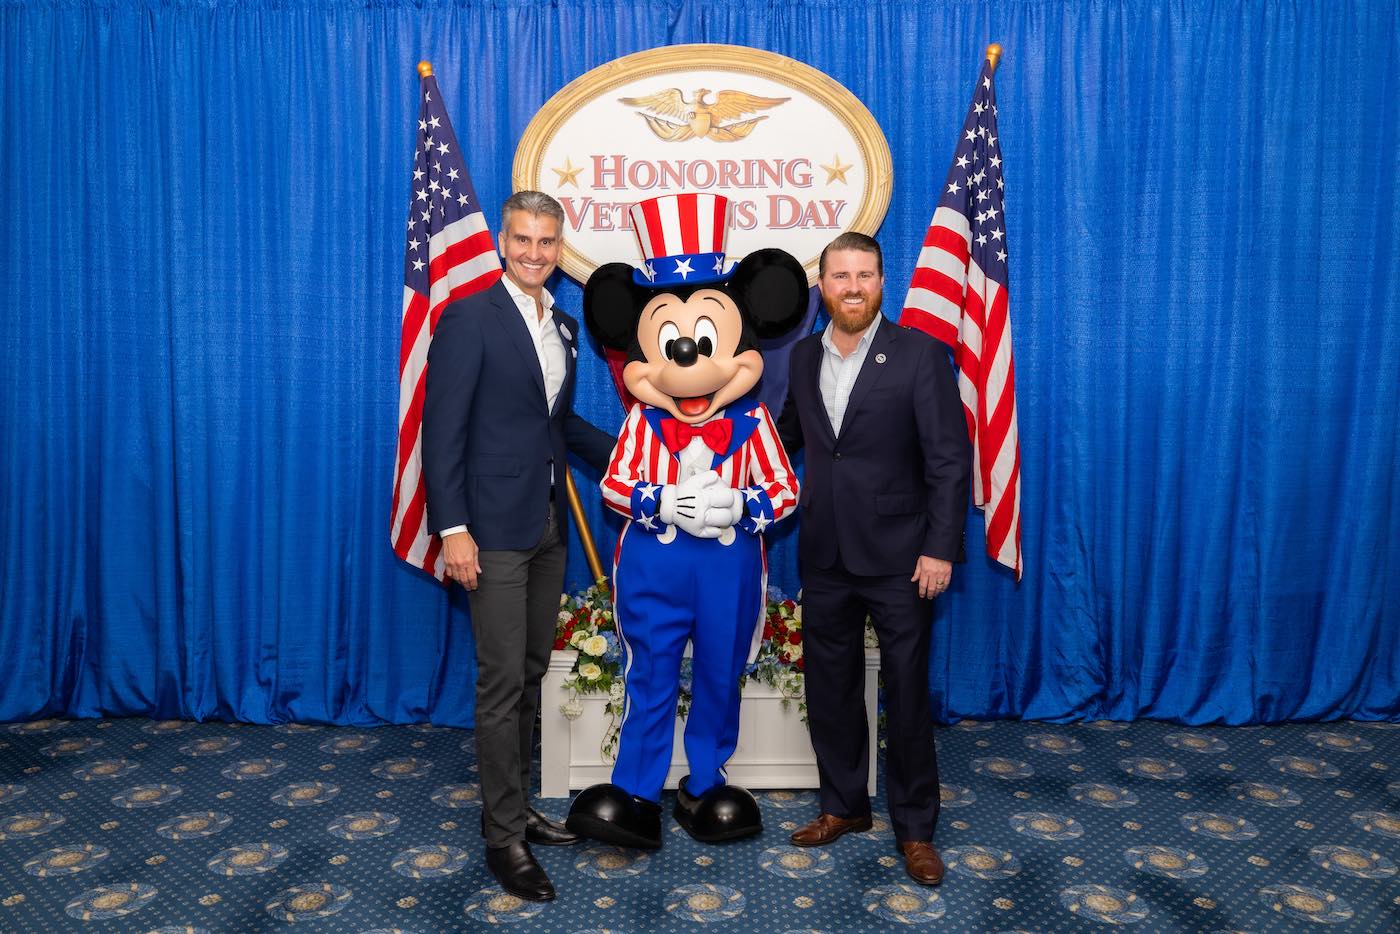 Disney Experiences Chairman Josh D’Amaro with Mickey Mouse and Student Veterans of America president and CEO Jared Lyon.